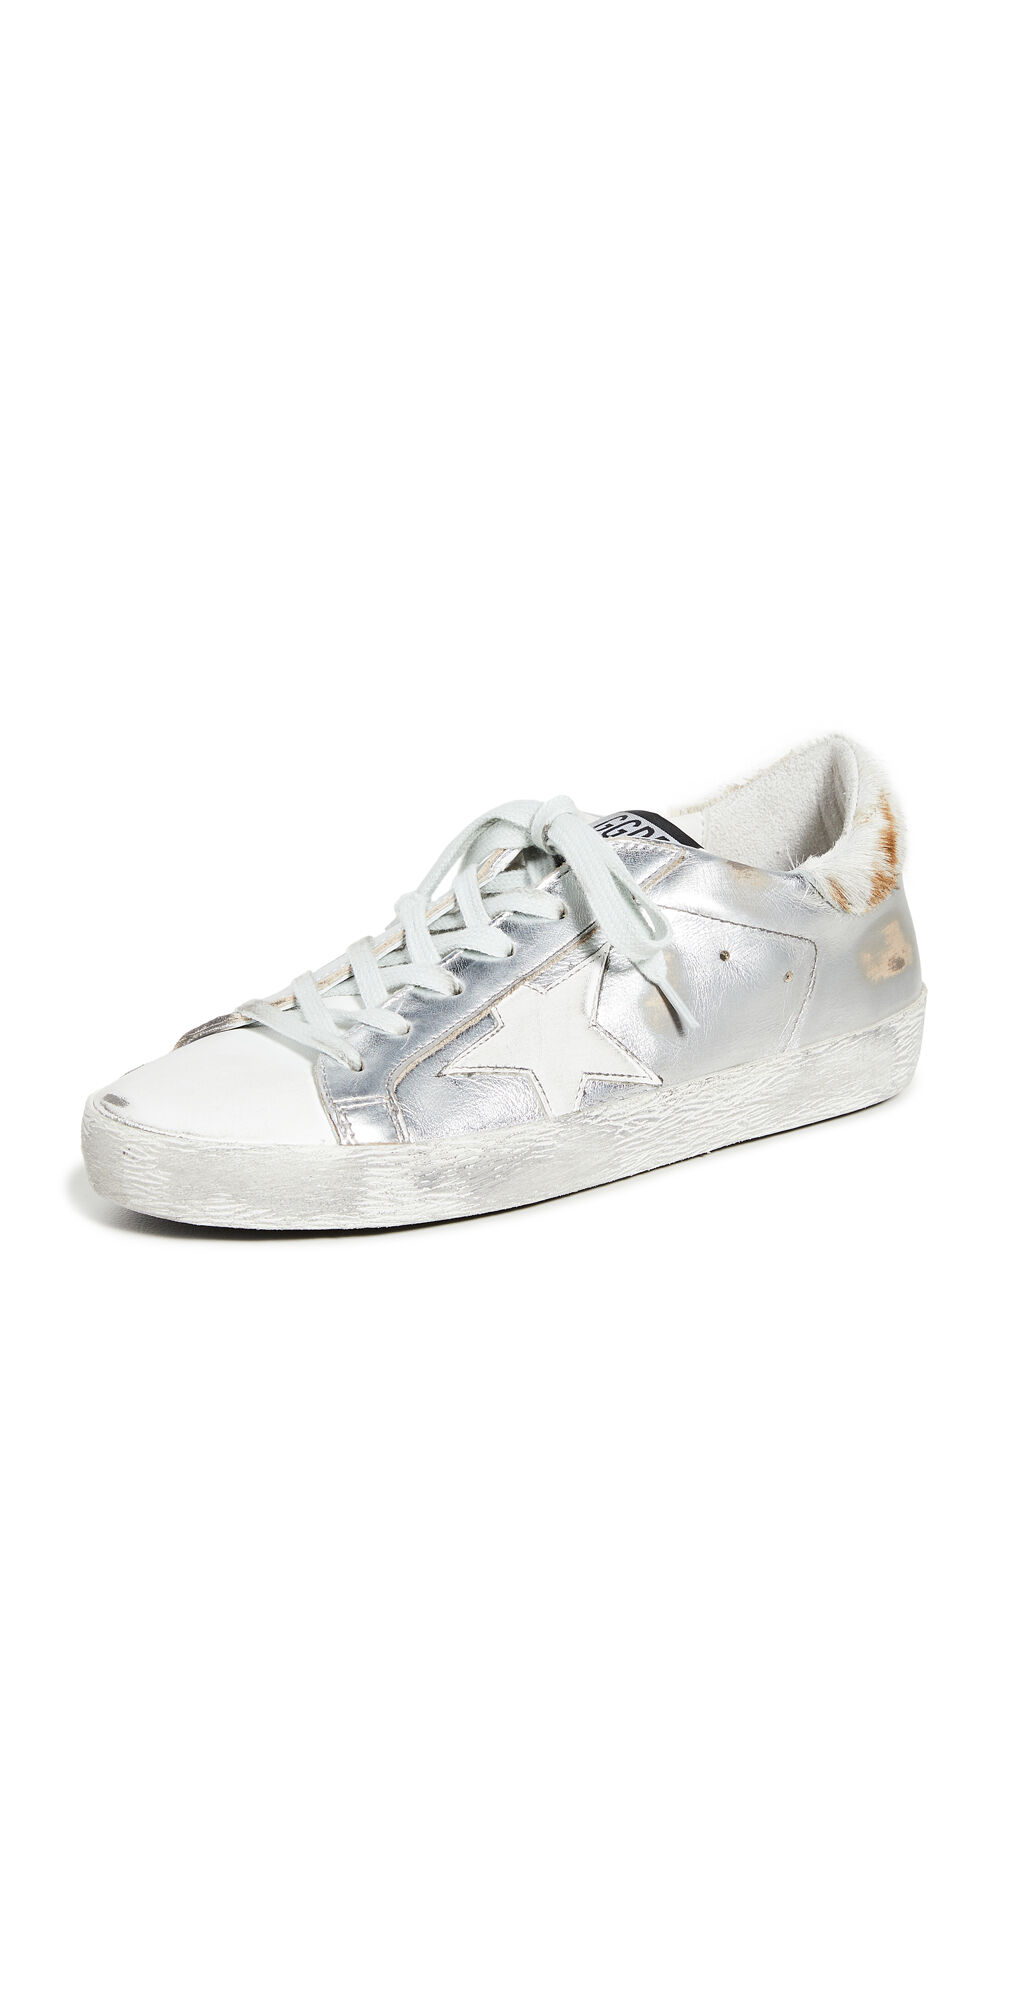 Golden Goose Superstar Sneakers Silver/Cow 37  Silver/Cow  size:37